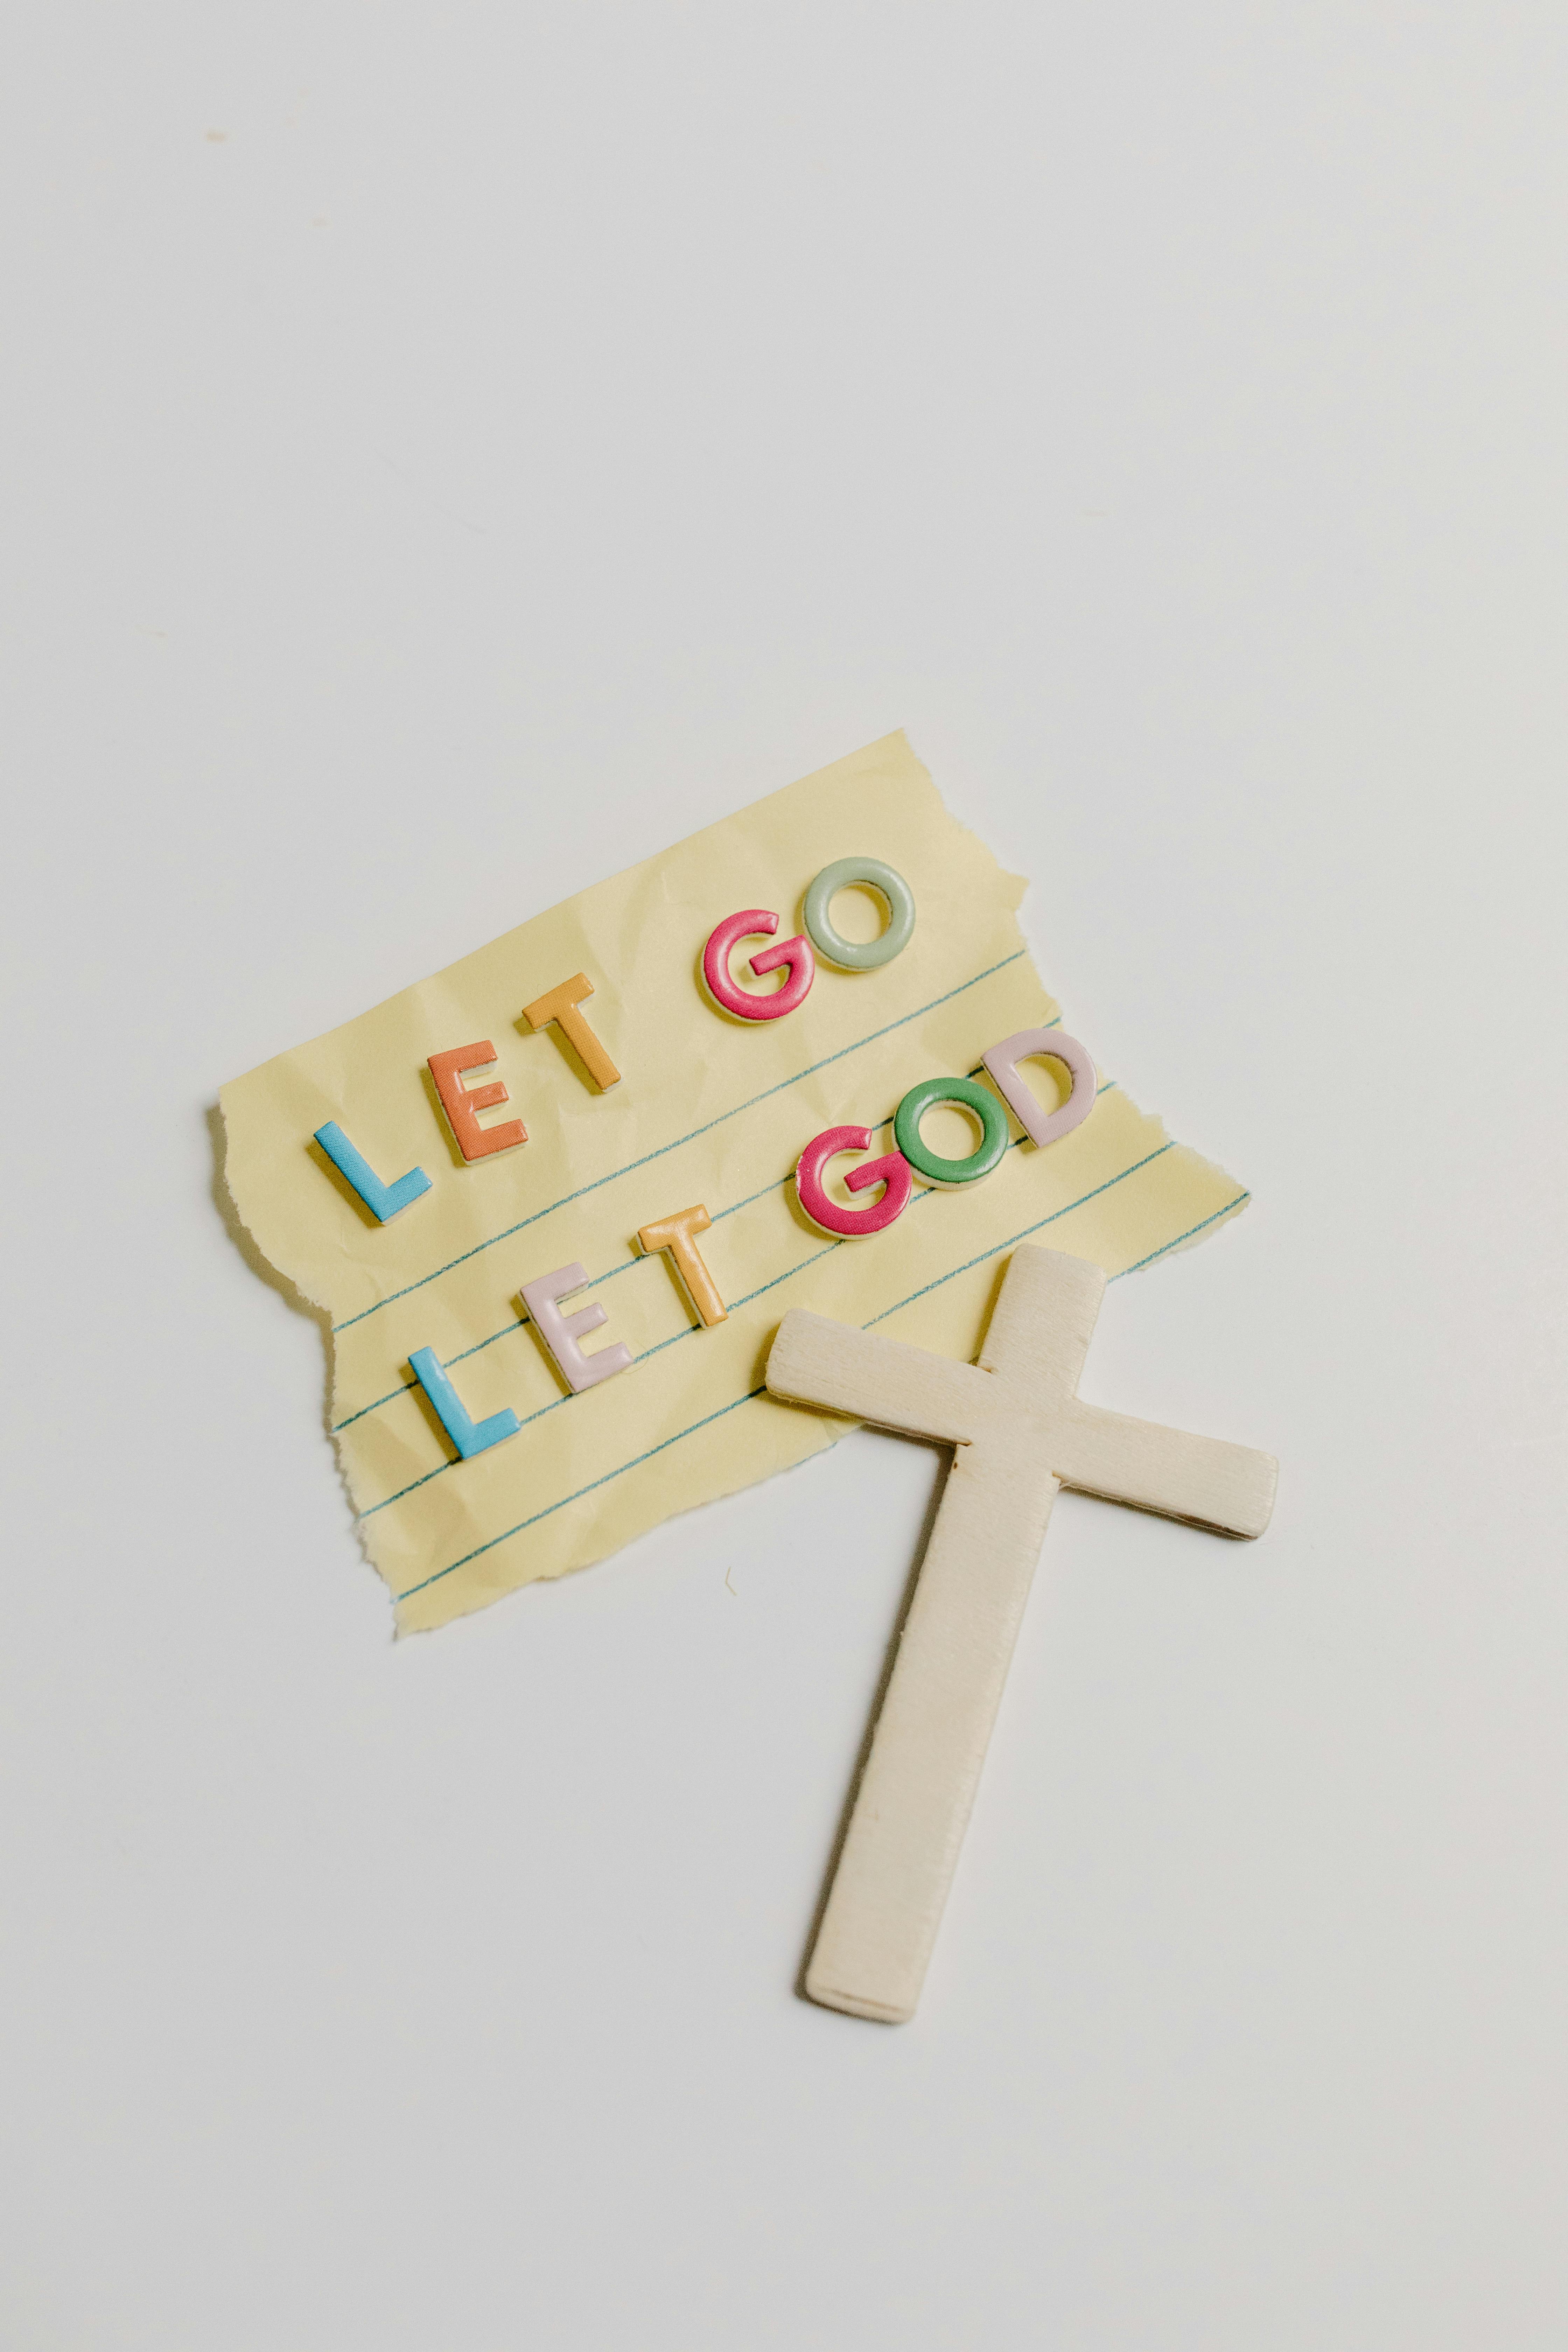 Let Go And Let God Quotes QuotesGram